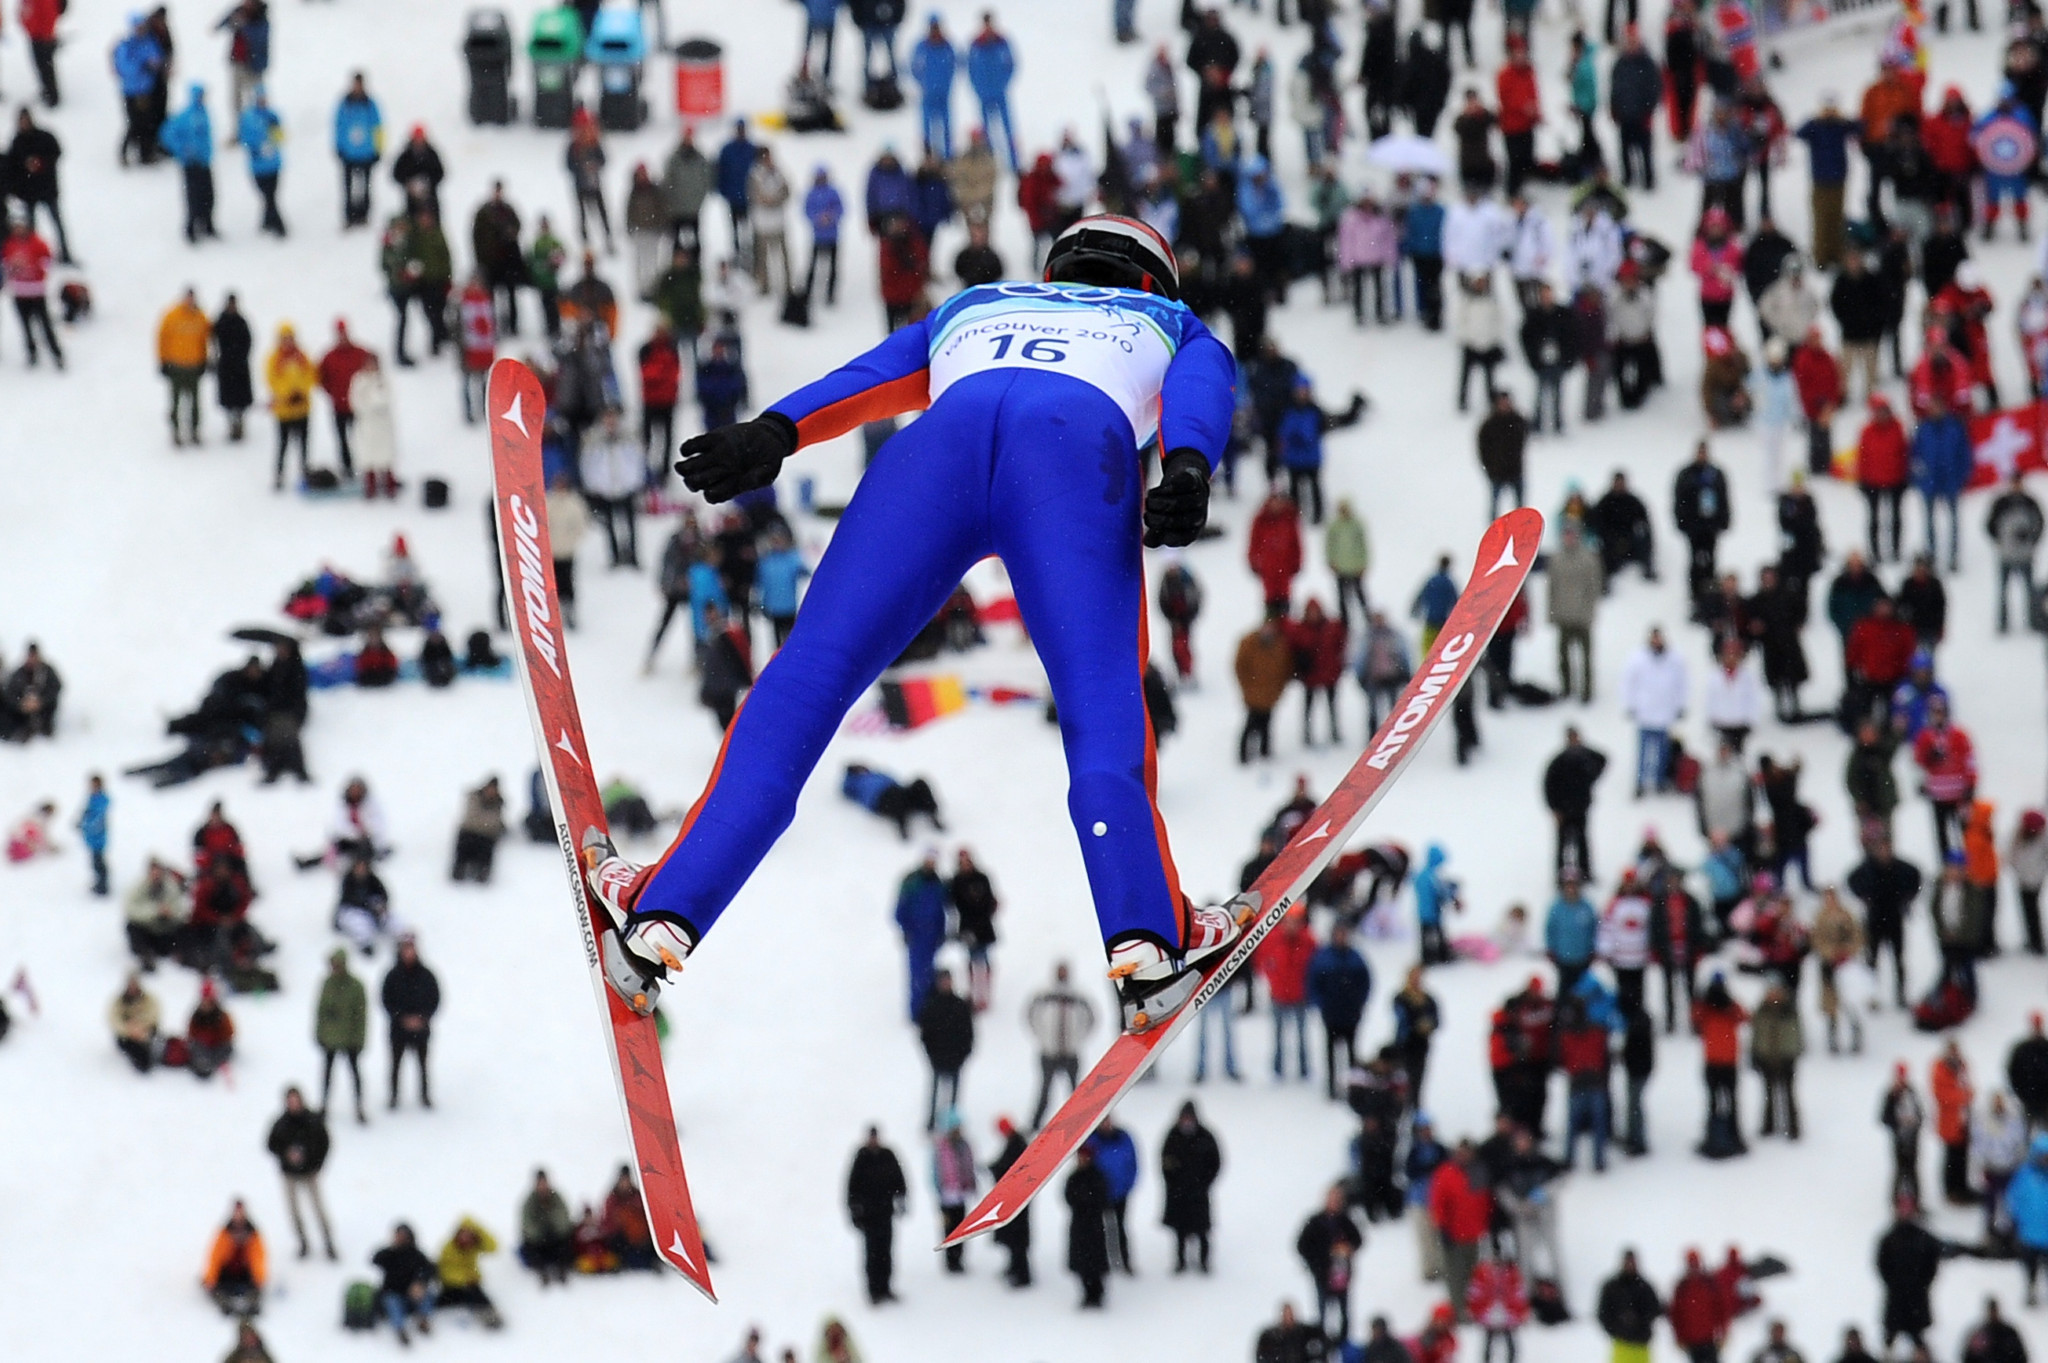 Calgary 2026 proposes re-using the Vancouver 2010 ski jumping venue in Whistler for that sport and Nordic combined rather than the one used when they hosted the Winter Olympics in 1988 ©Getty Images